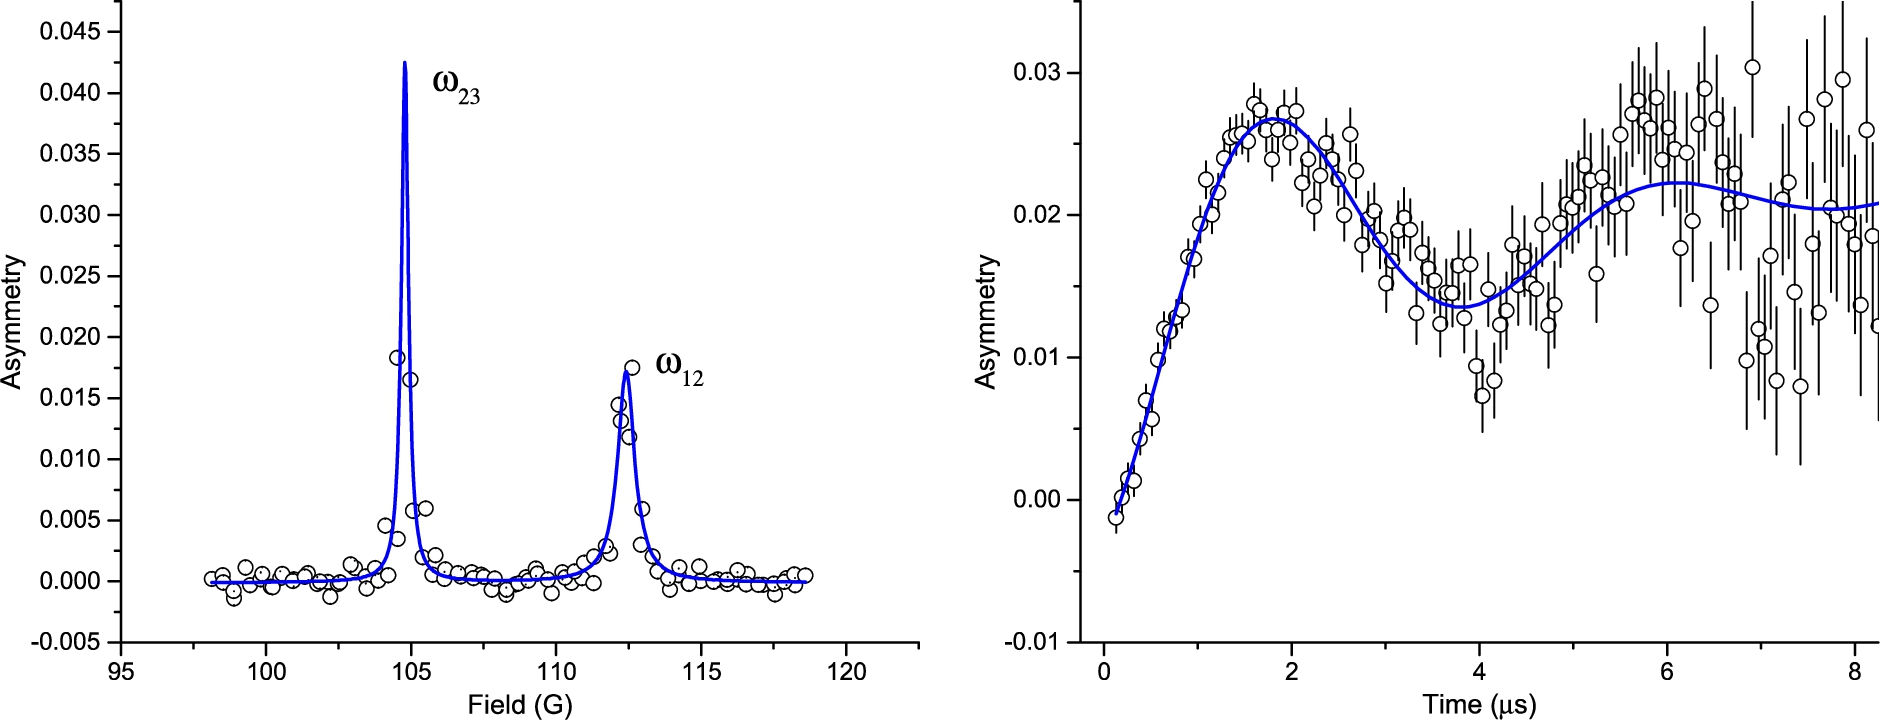 (left) A swept field measurement defines the two lines corresponding to the ω12 (112.4 G) and ω23 (104.8 G) transitions. (right) A measurement of the muon response at resonance with the ω12 transition, suggesting a B1 field strength of ∼0.2 G.